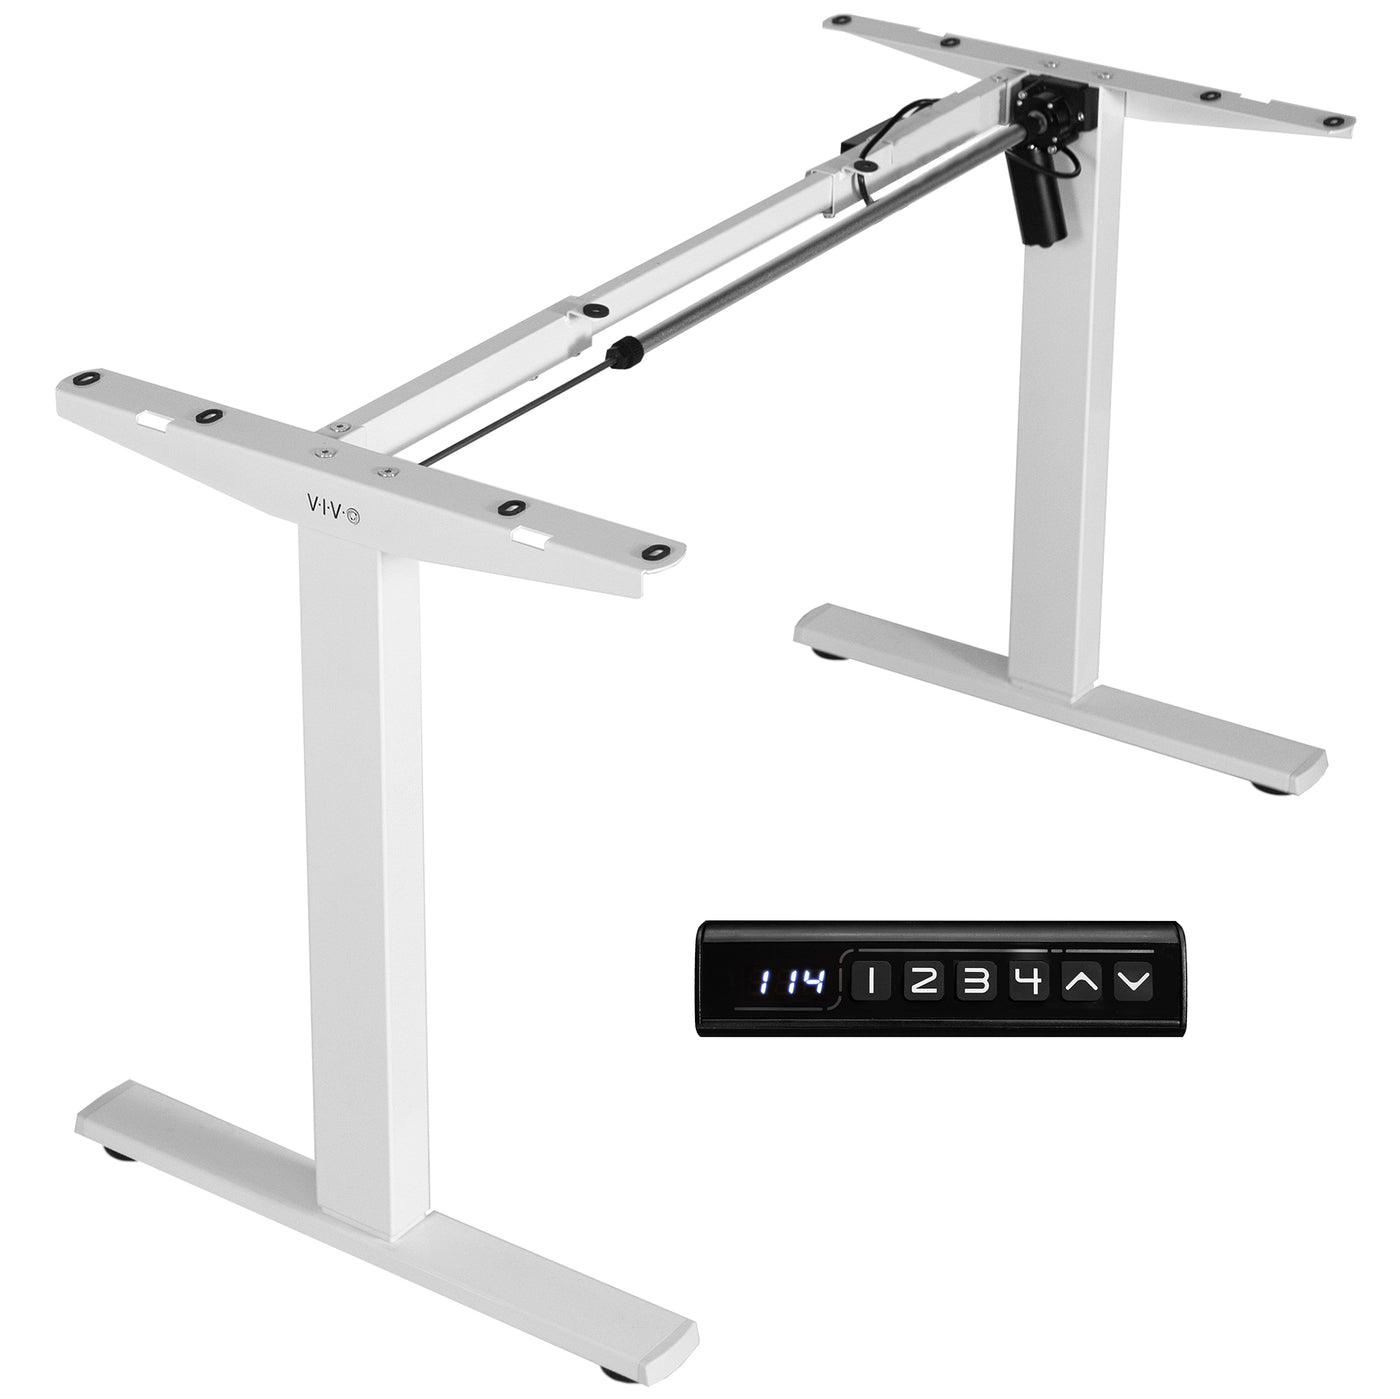 Sturdy ergonomic sit or stand desk frame for active workstation with adjustable height using smart control panel.